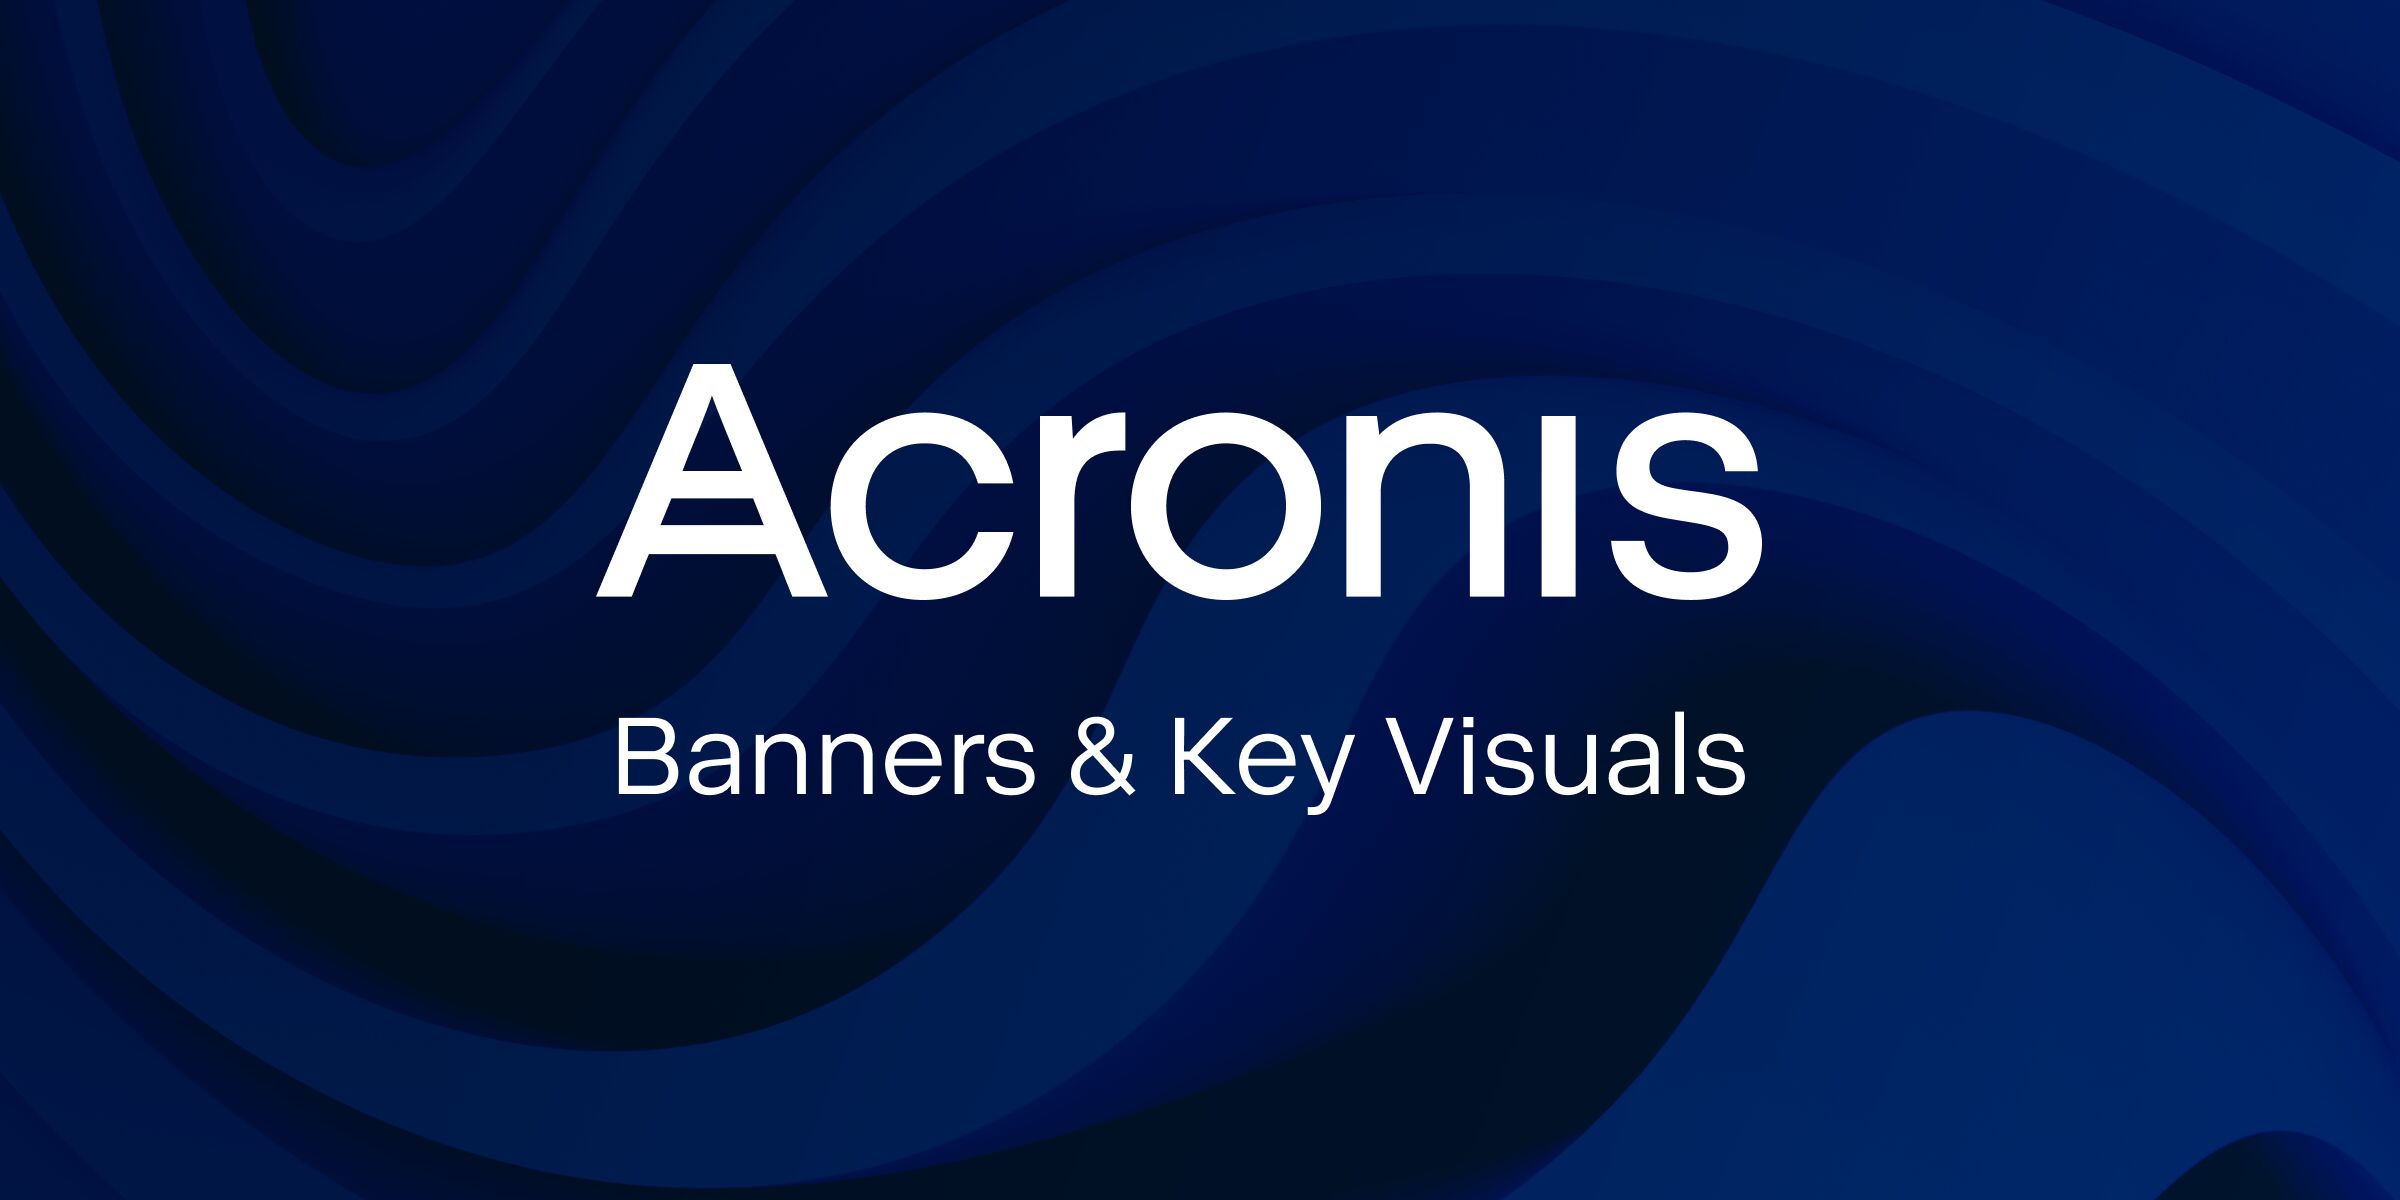 Acronis. Banners & Key Visuals